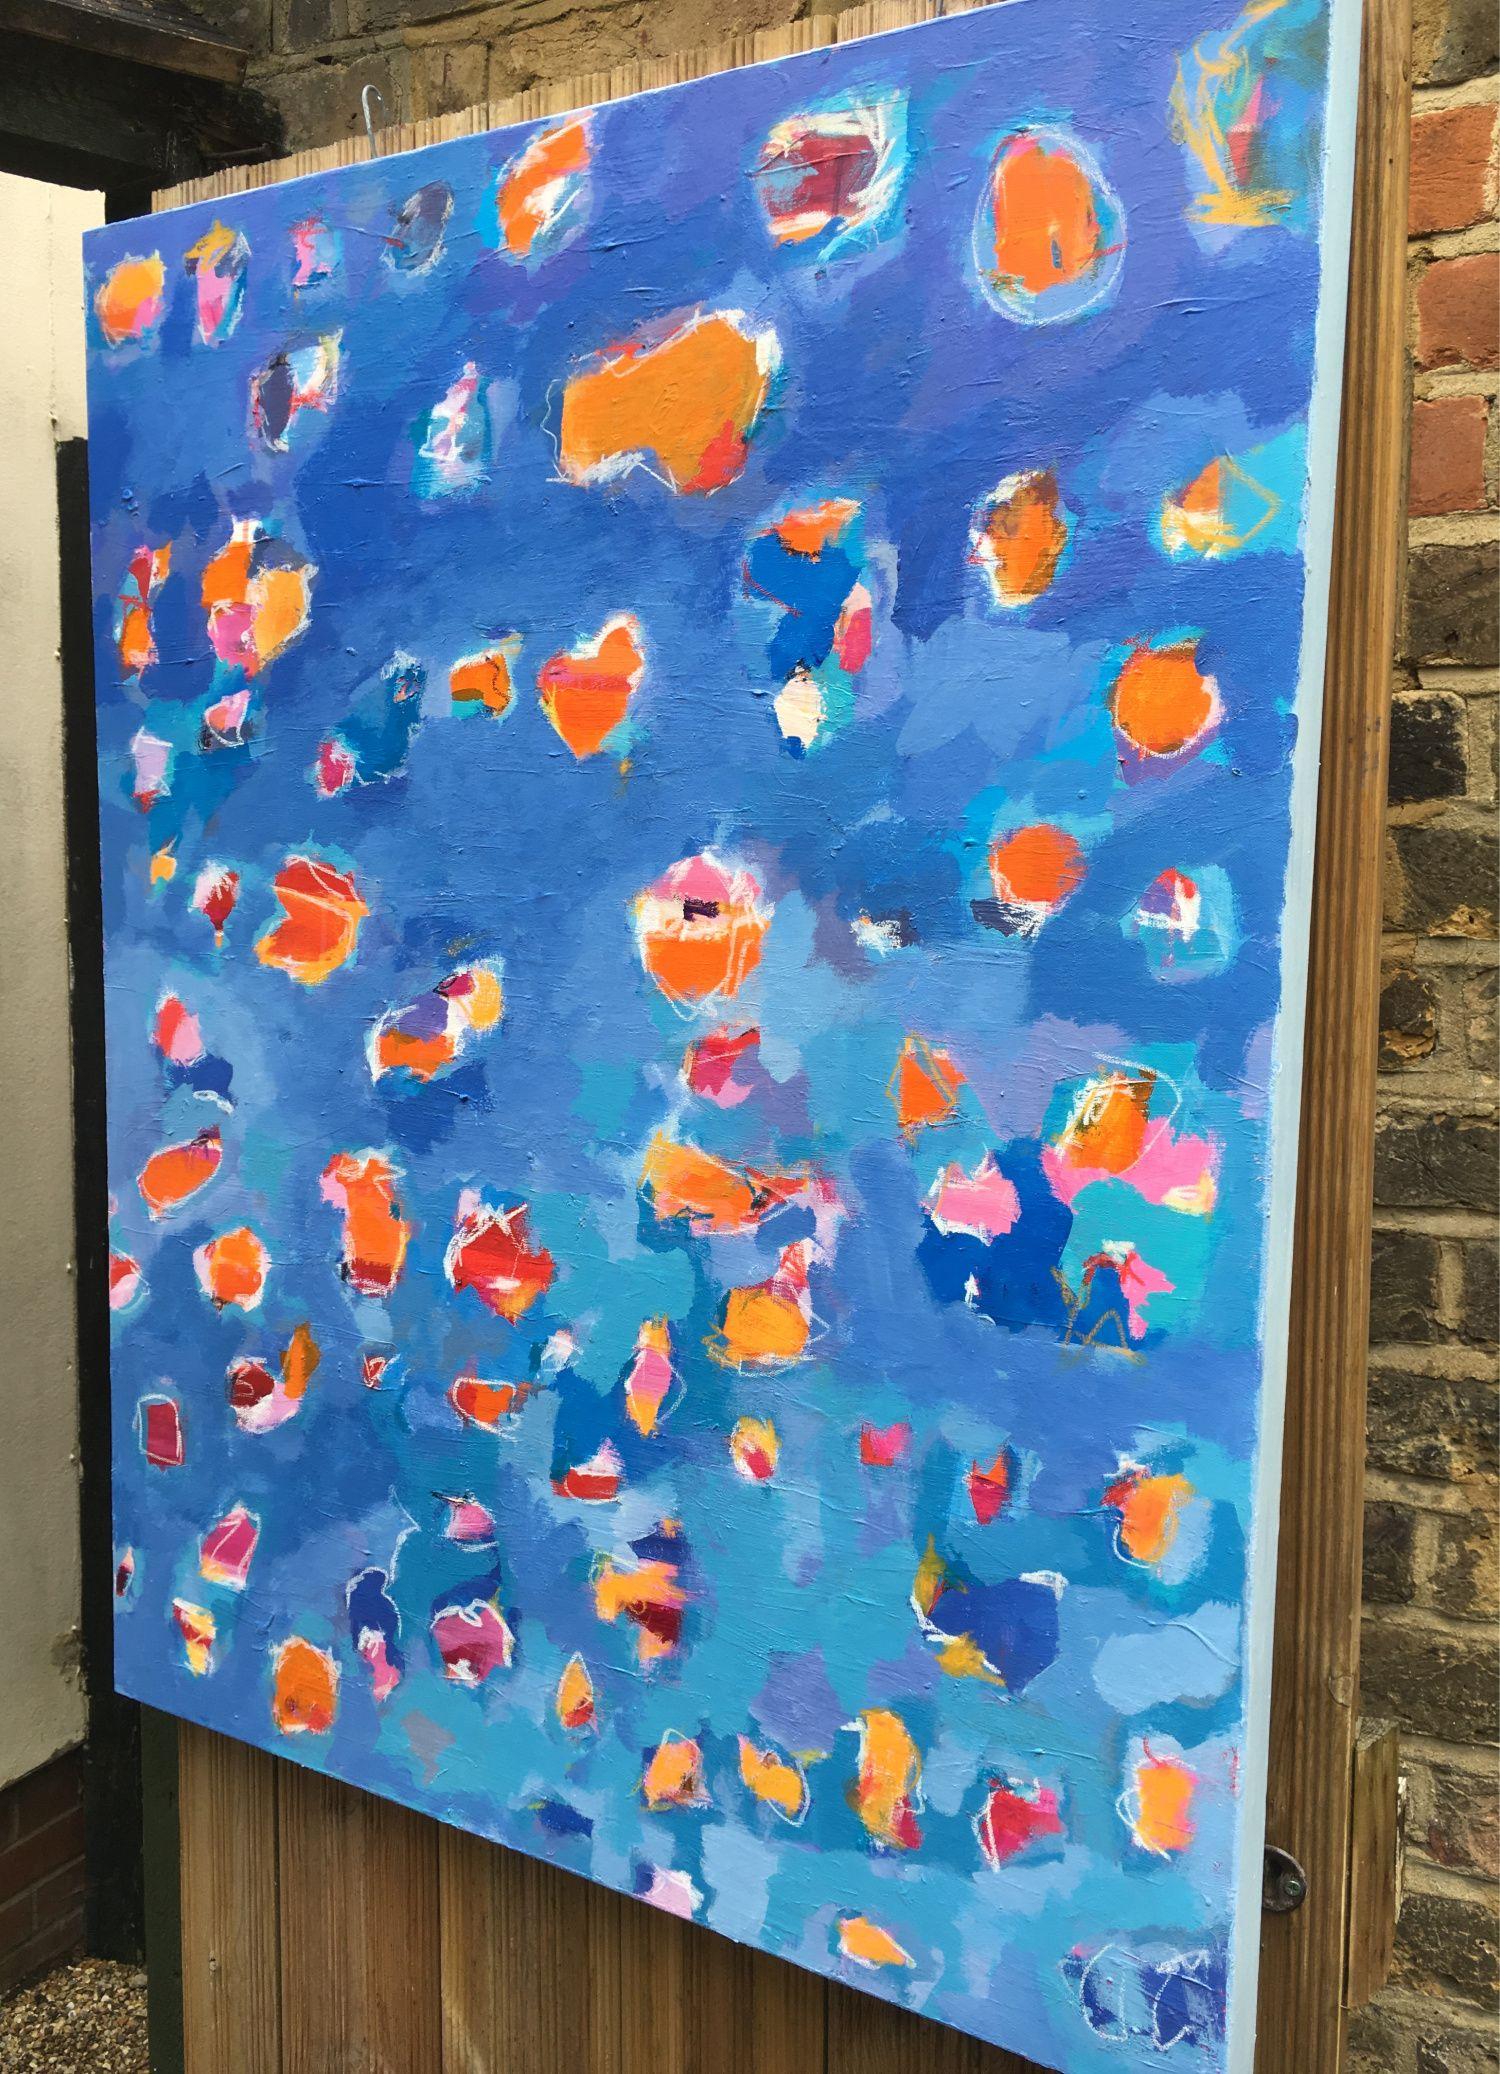 A very vibrant summer painting which I have worked on for quite some time building the painting carefully layer by layer with acrylics and pastels. Strong blues, purples, orange and pink combine to a colourful, abstract painting inspired by a joyful